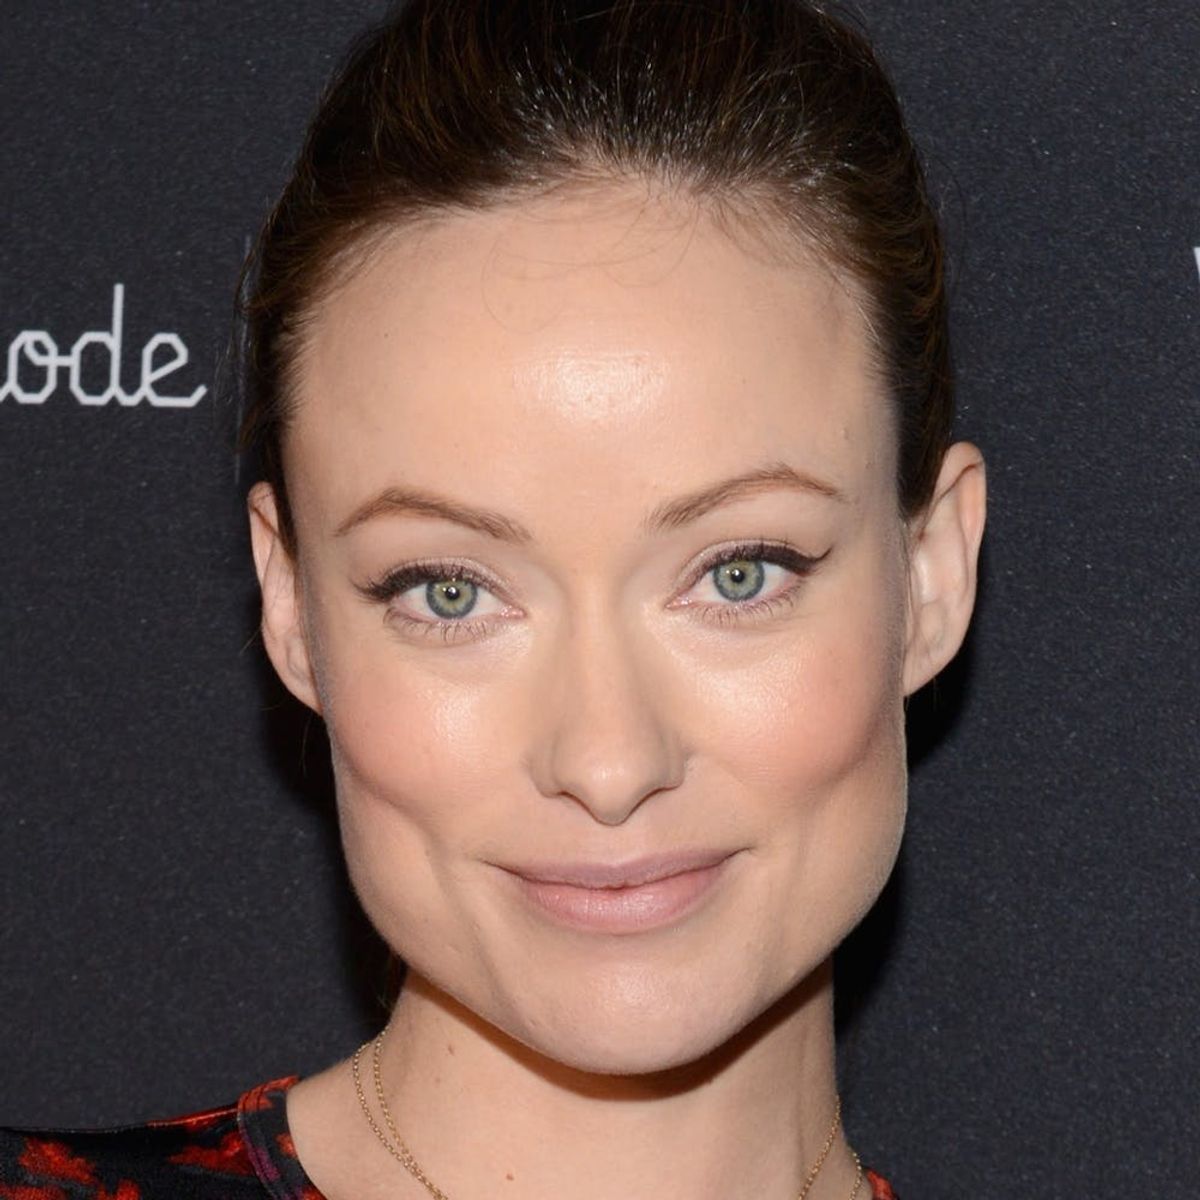 Olivia Wilde Just Chopped Her Hair for This Unexpectedly Political Reason